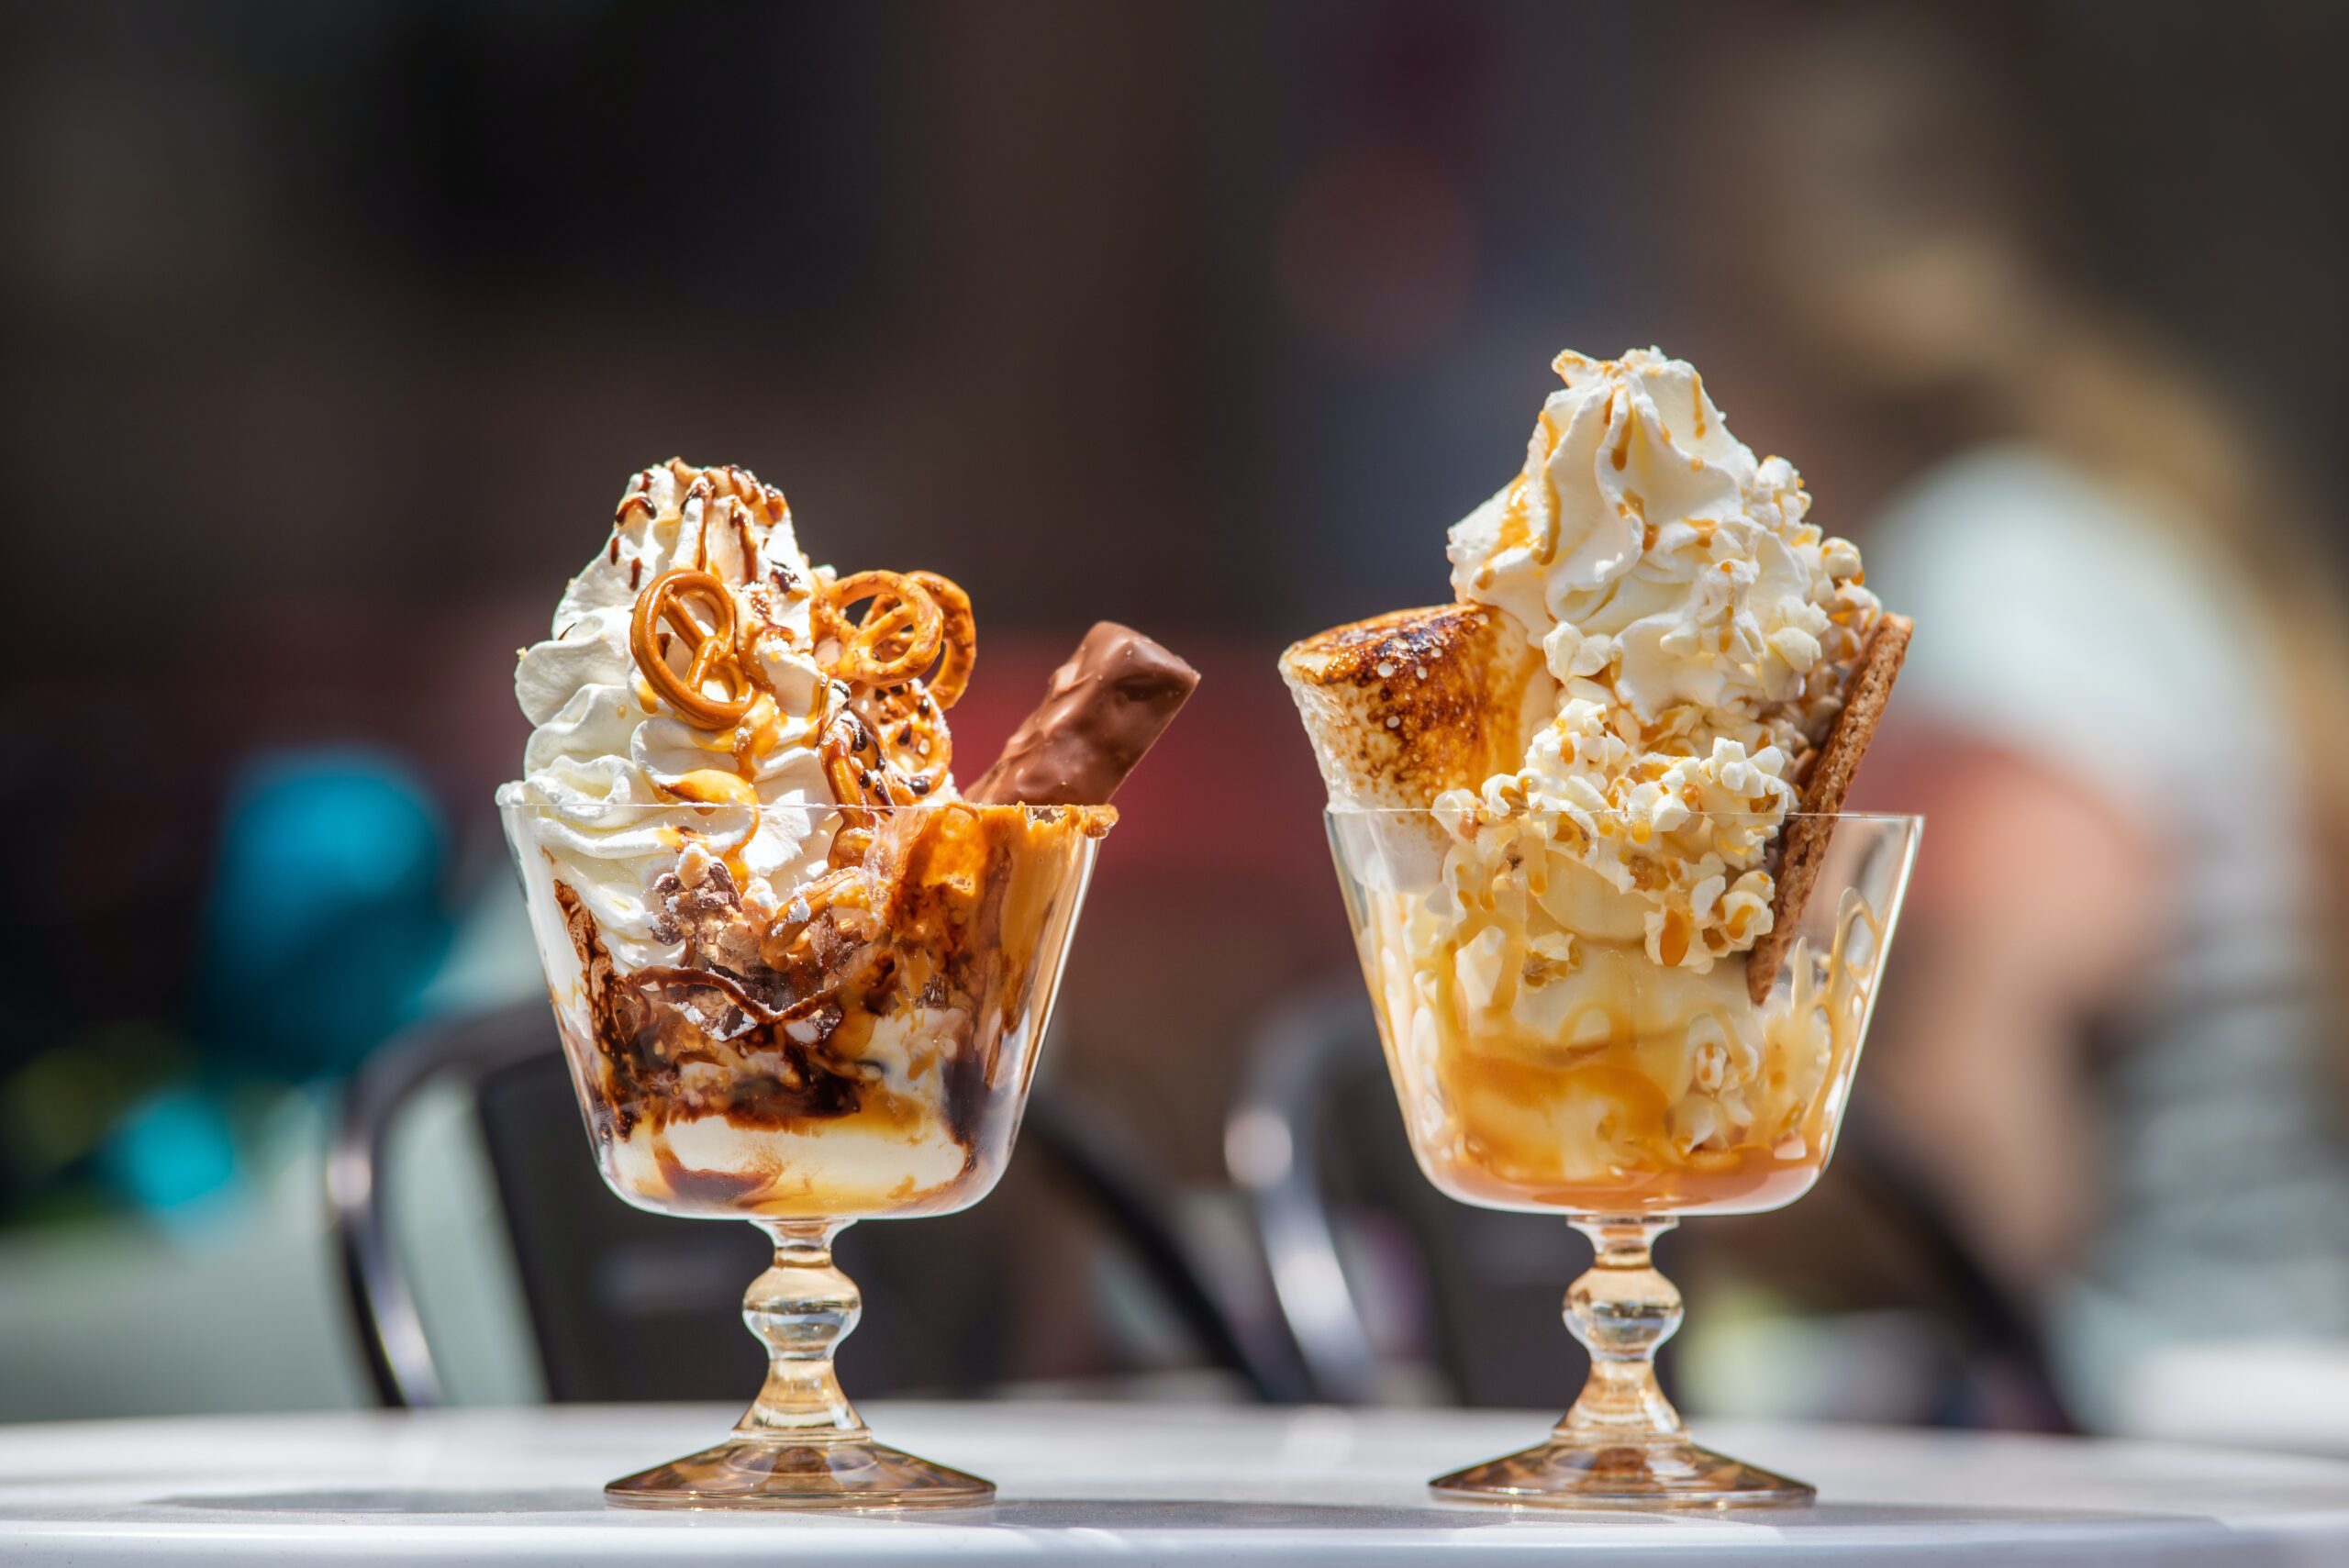 2 ice cream sundaes with pretzels, candy bars, toasted marshmallows, graham crackers, chocolate and caramel sauces drizzled on top.